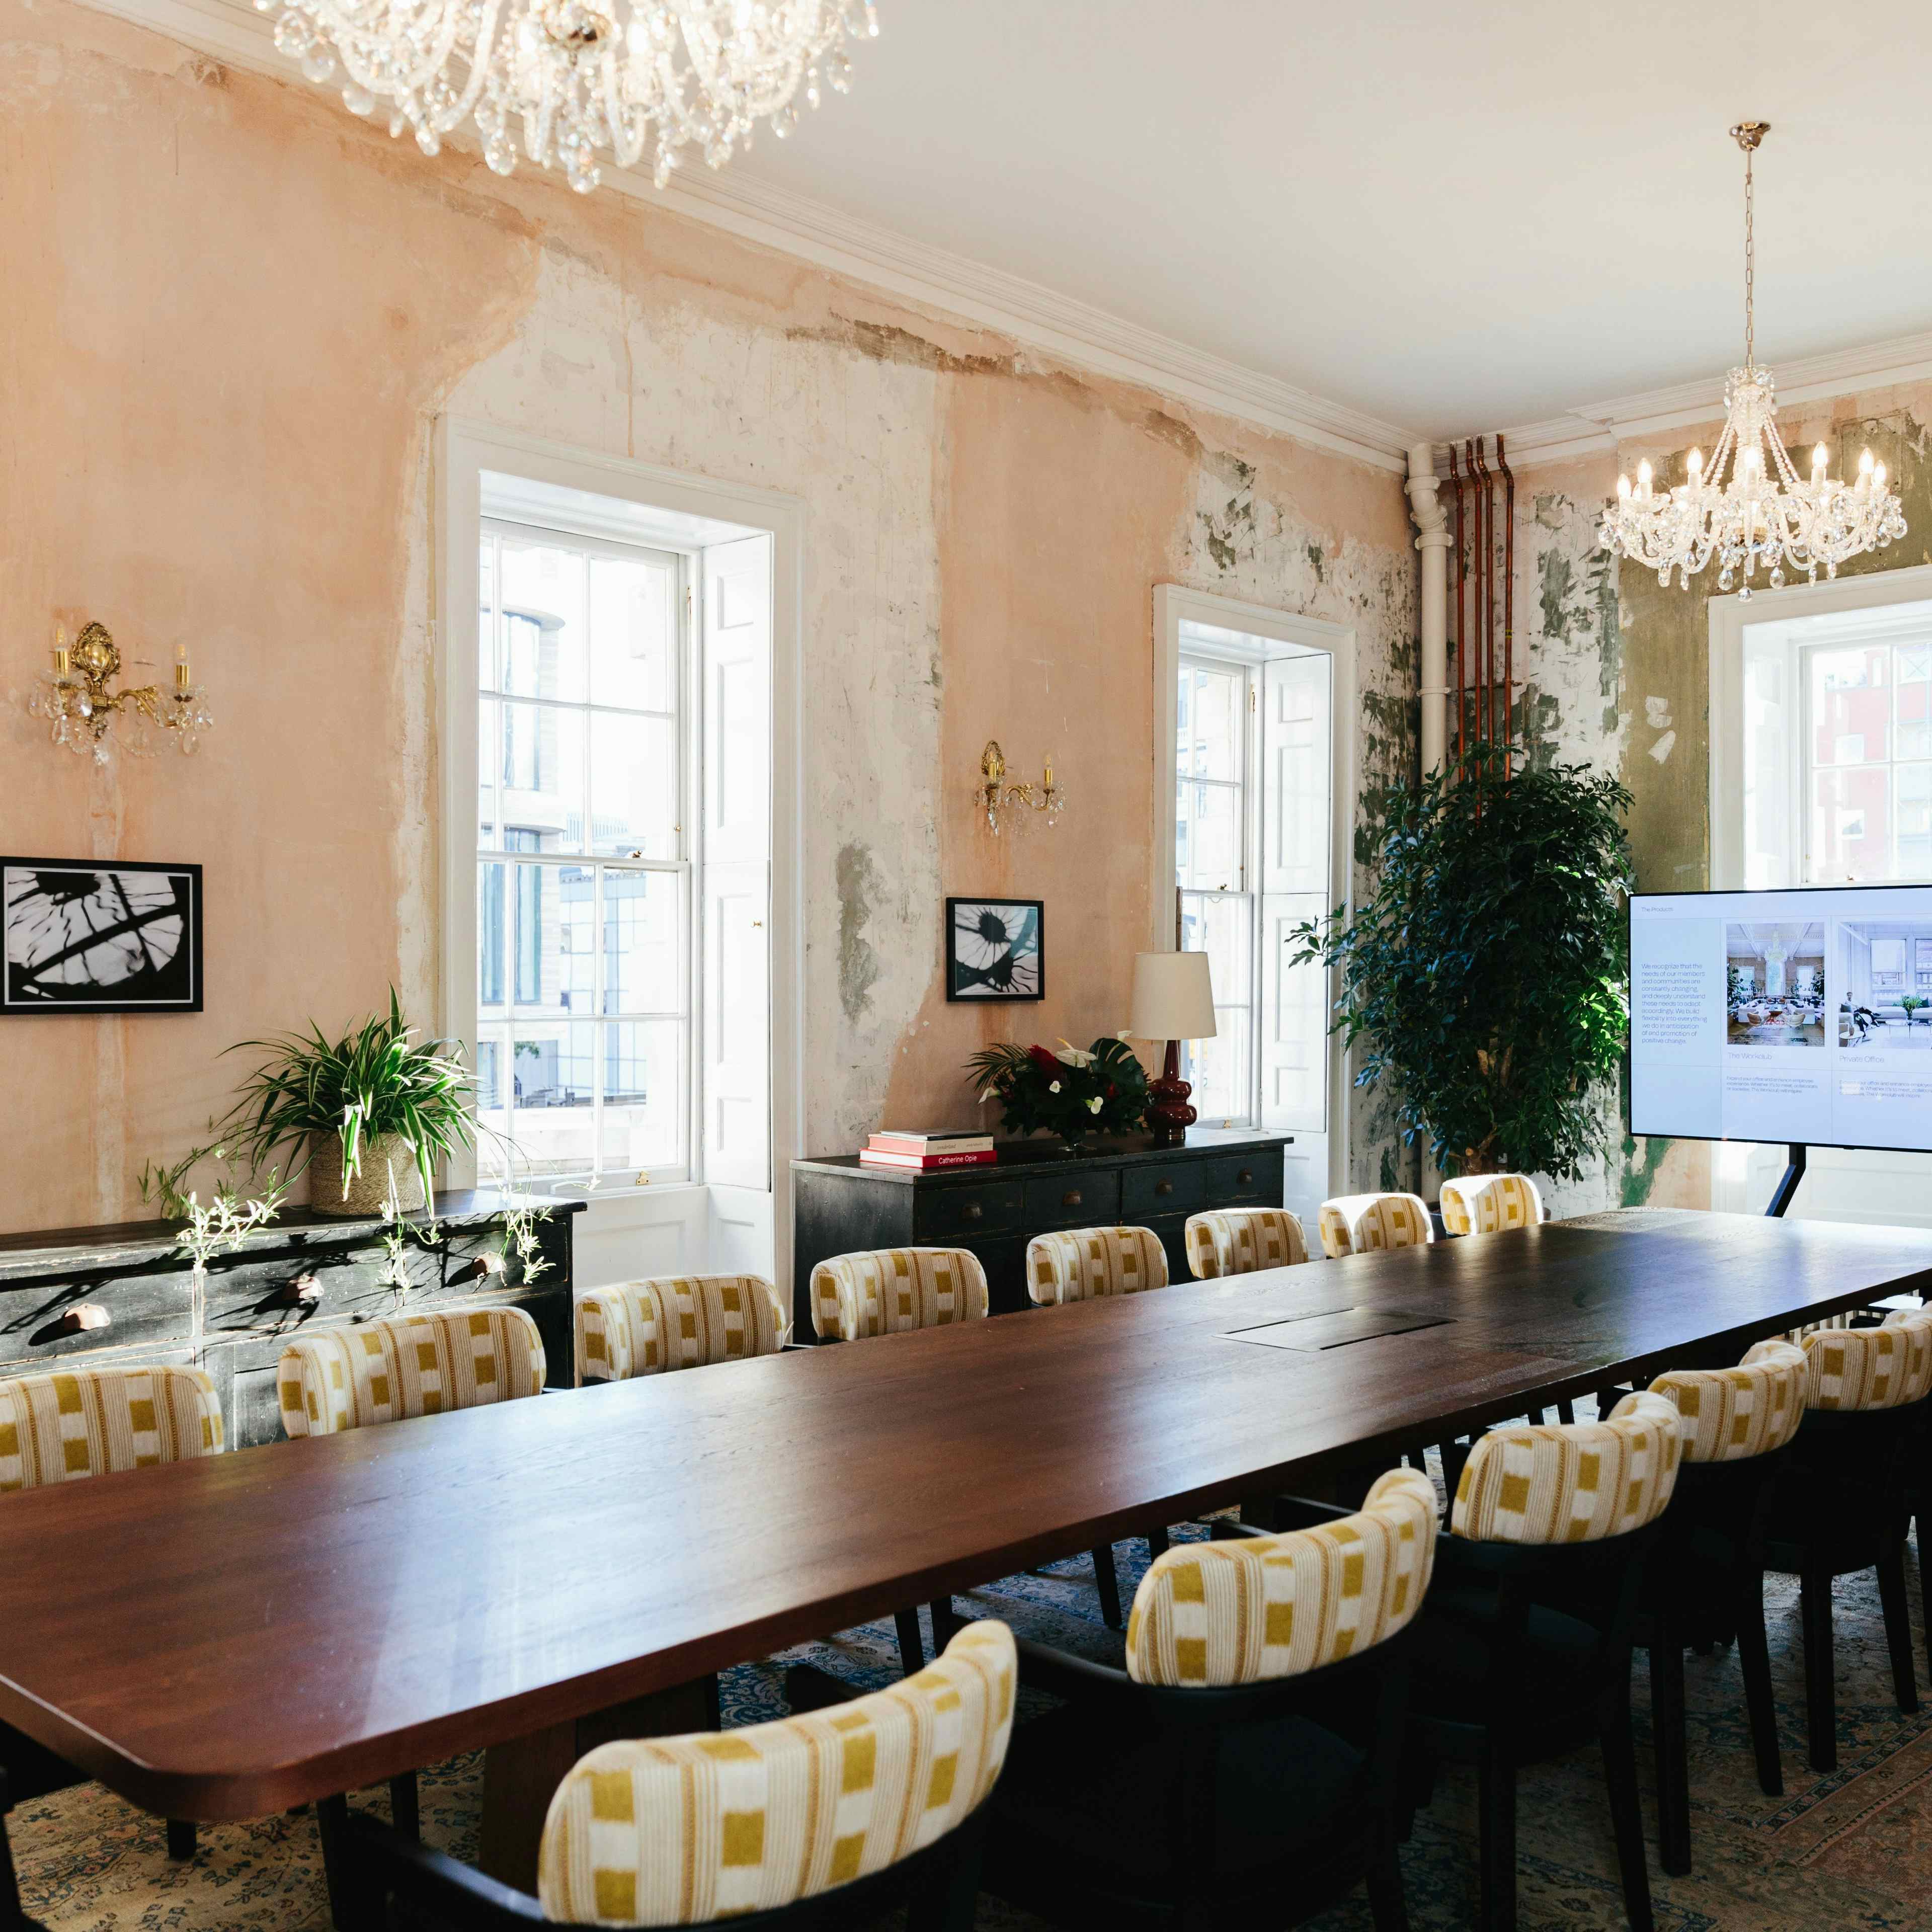 Knotel Workclub at Old Sessions House - Chairman's Room image 3